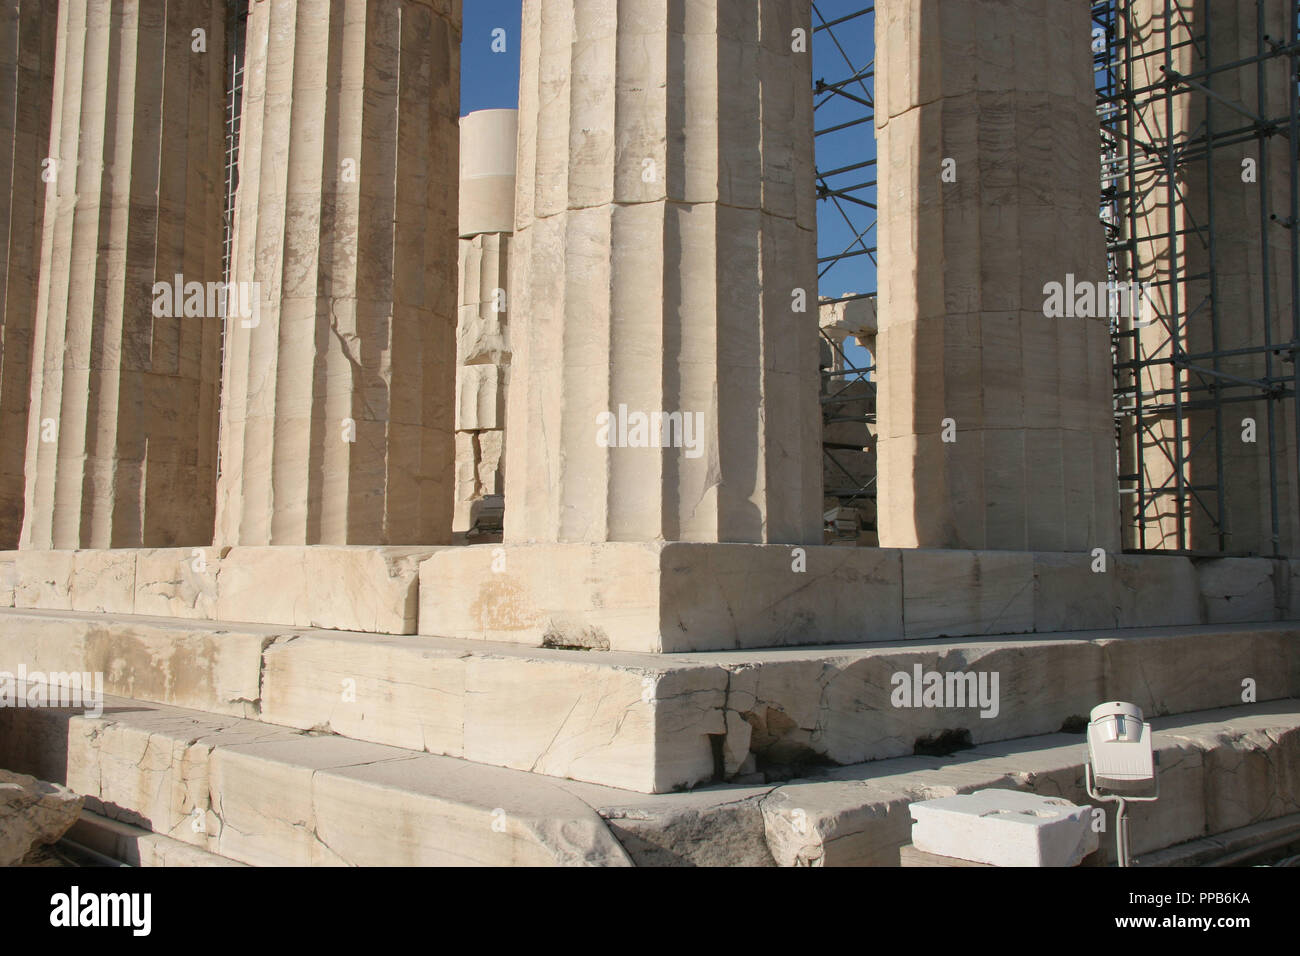 Greek Art. Parthenon. Was built between 447-438 BC. in Doric style under leadership of Pericles. The building was designed by the architects Ictinos and Callicrates. Detail of stylobate and the shaft. Acropolis. Athens. Attica. Central Greek. Europe. Stock Photo